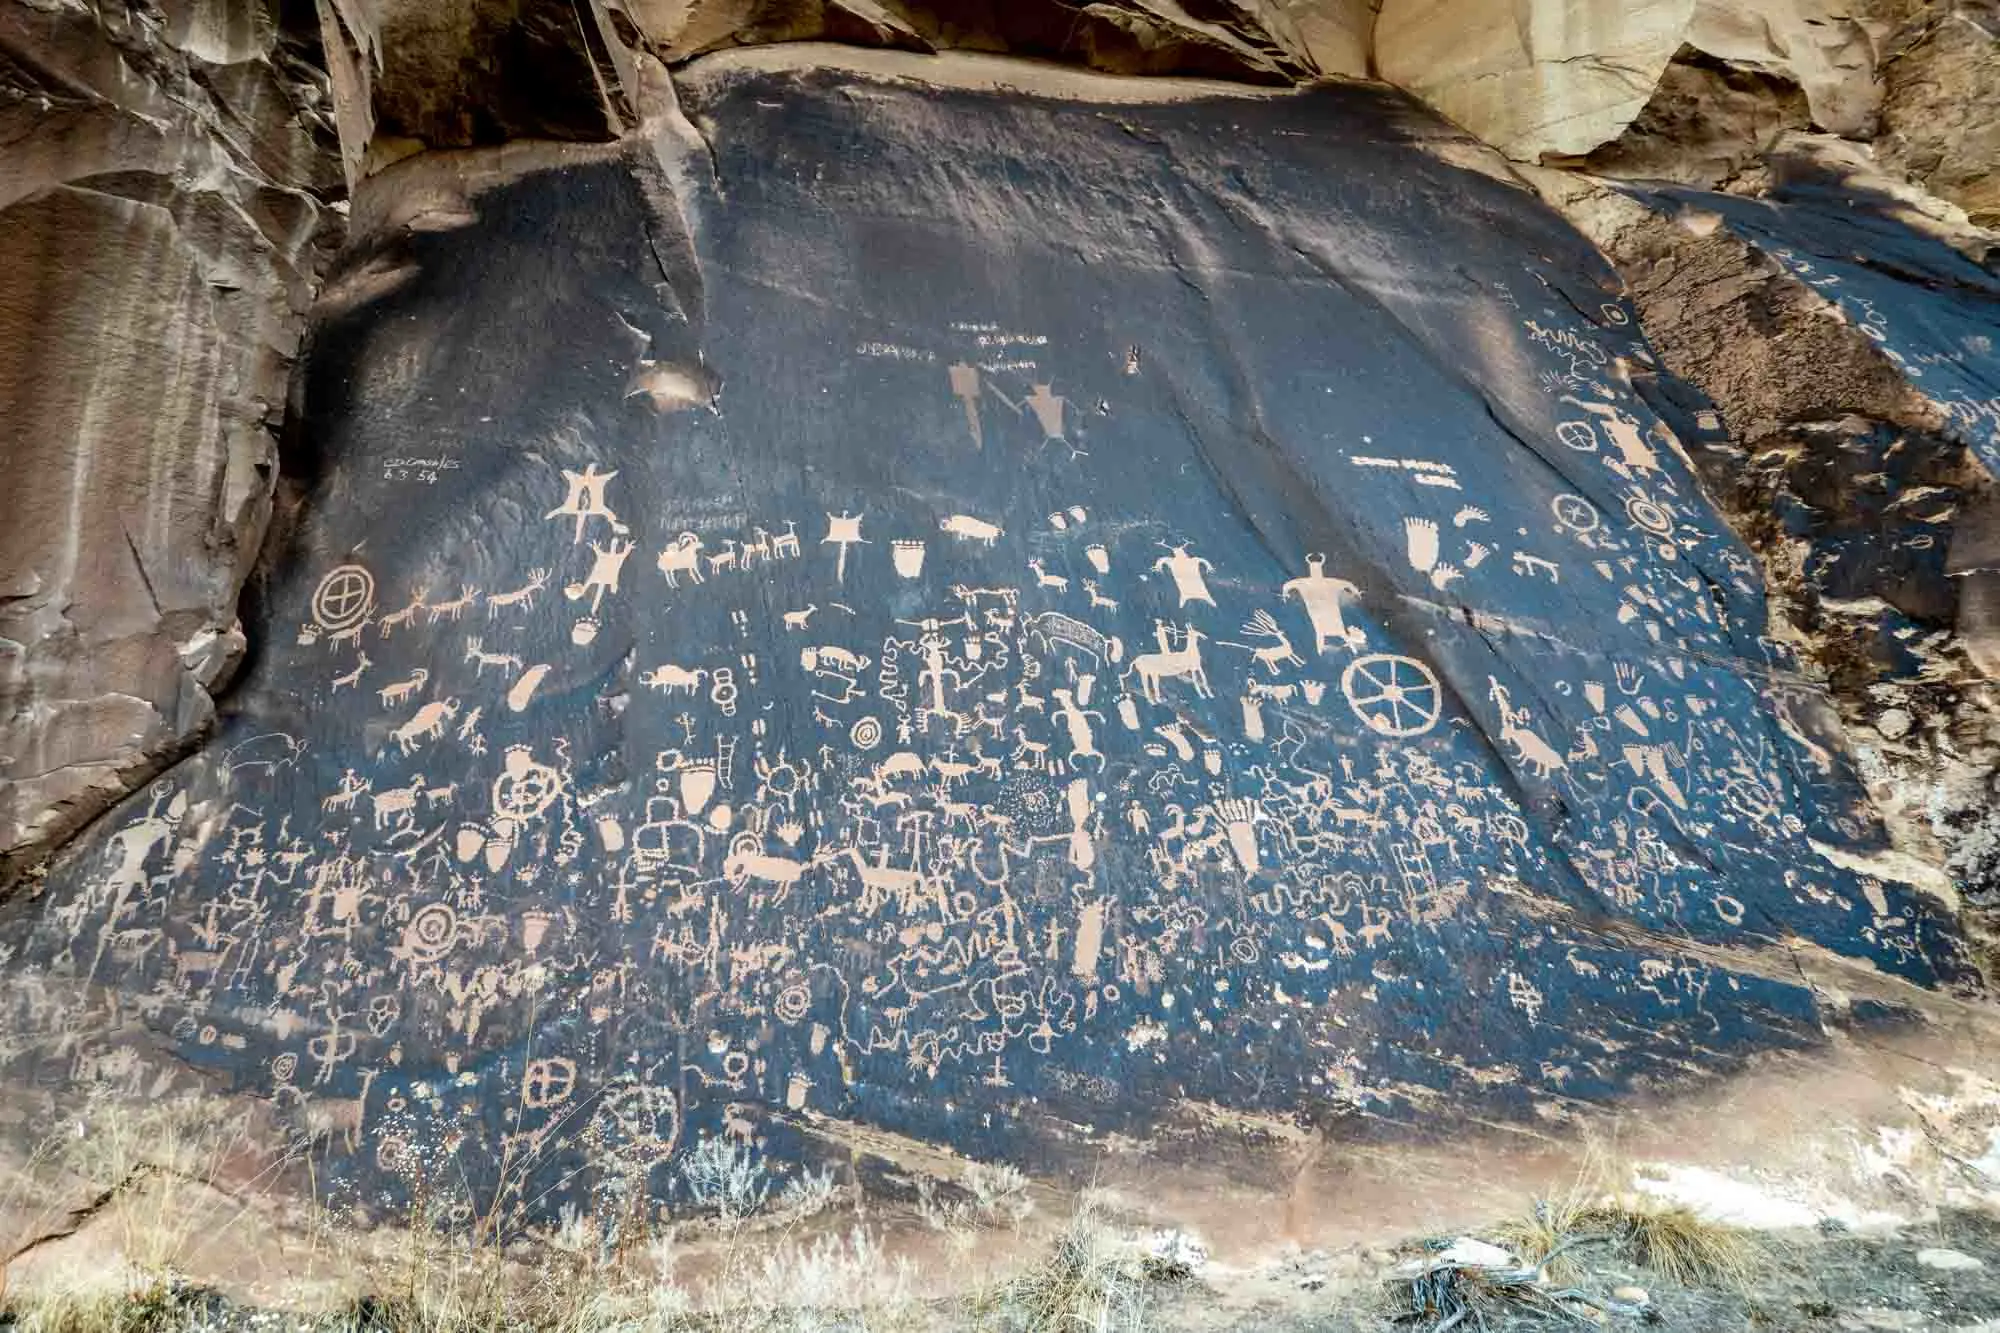 Large number of Native American petroglyphs carved into rock face